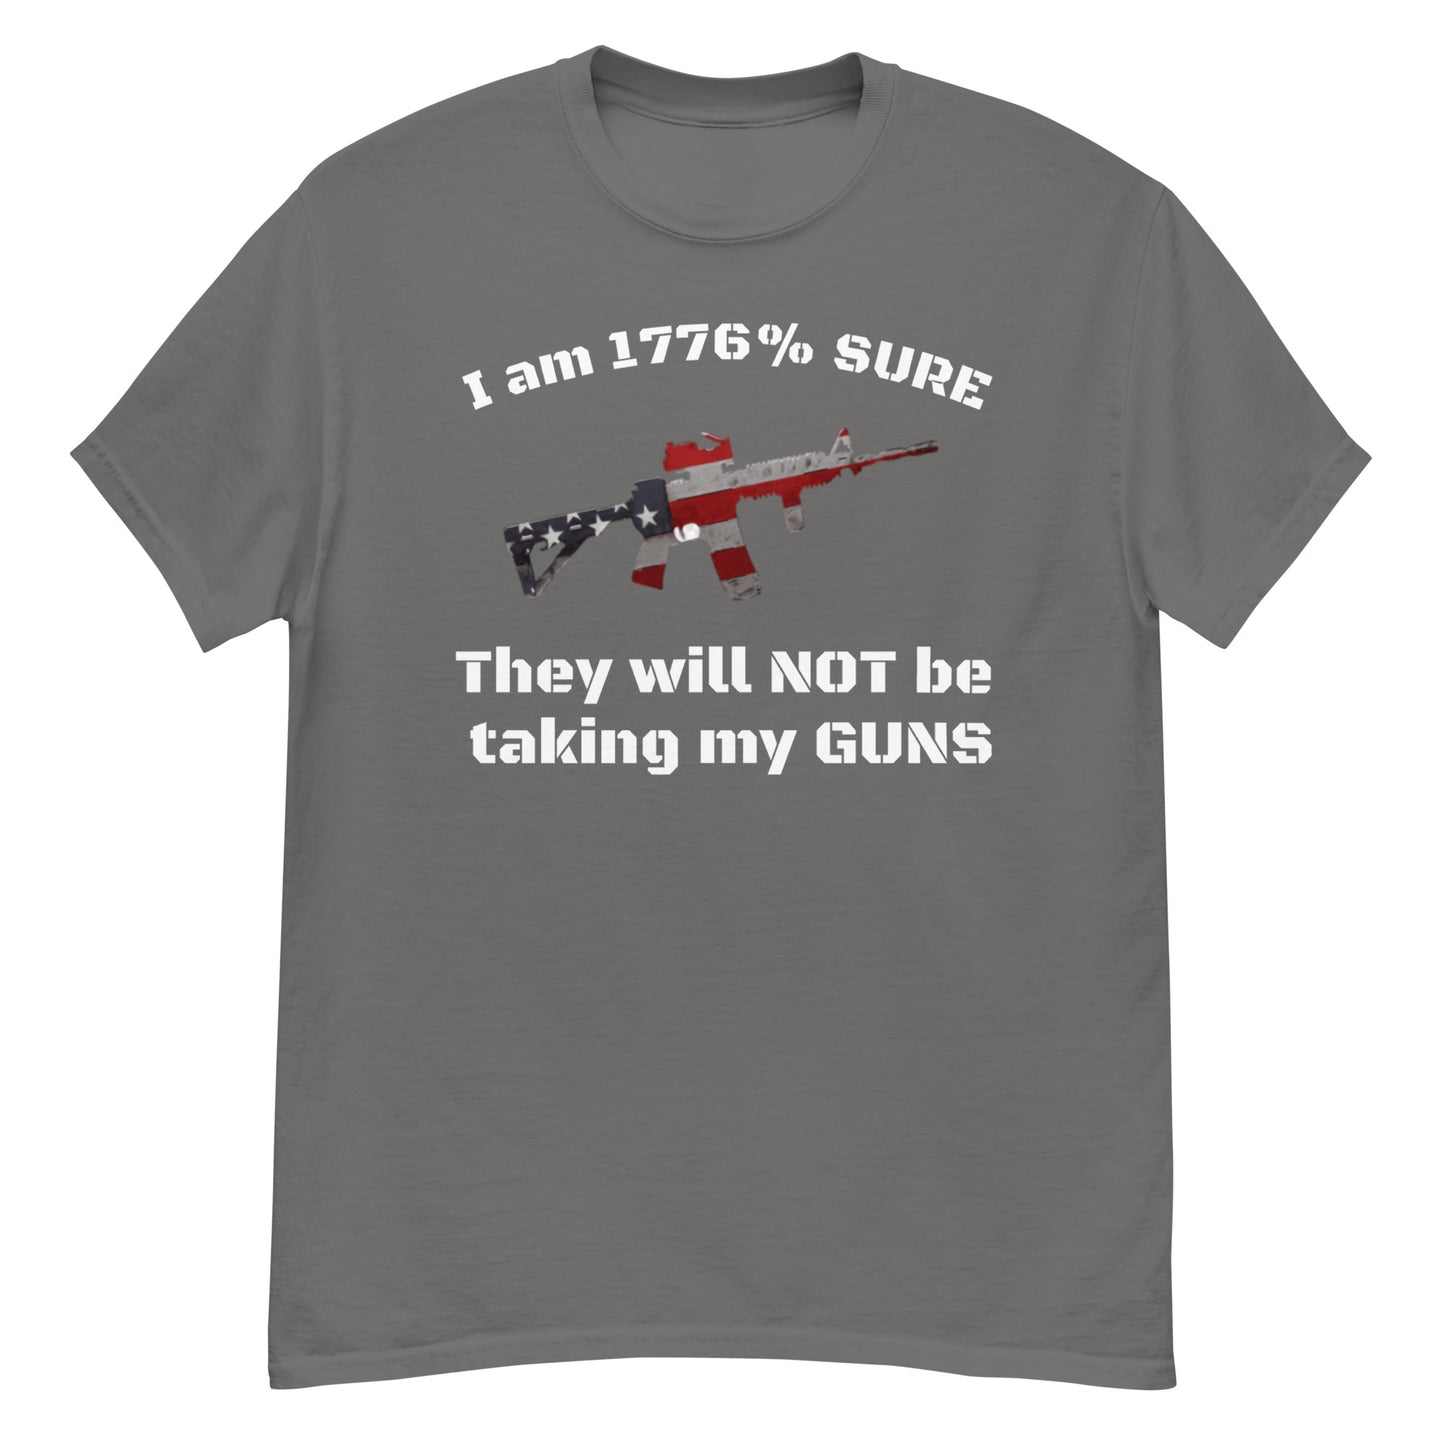 I am 1776% sure they will not be taking my guns classic tee (white lettering)